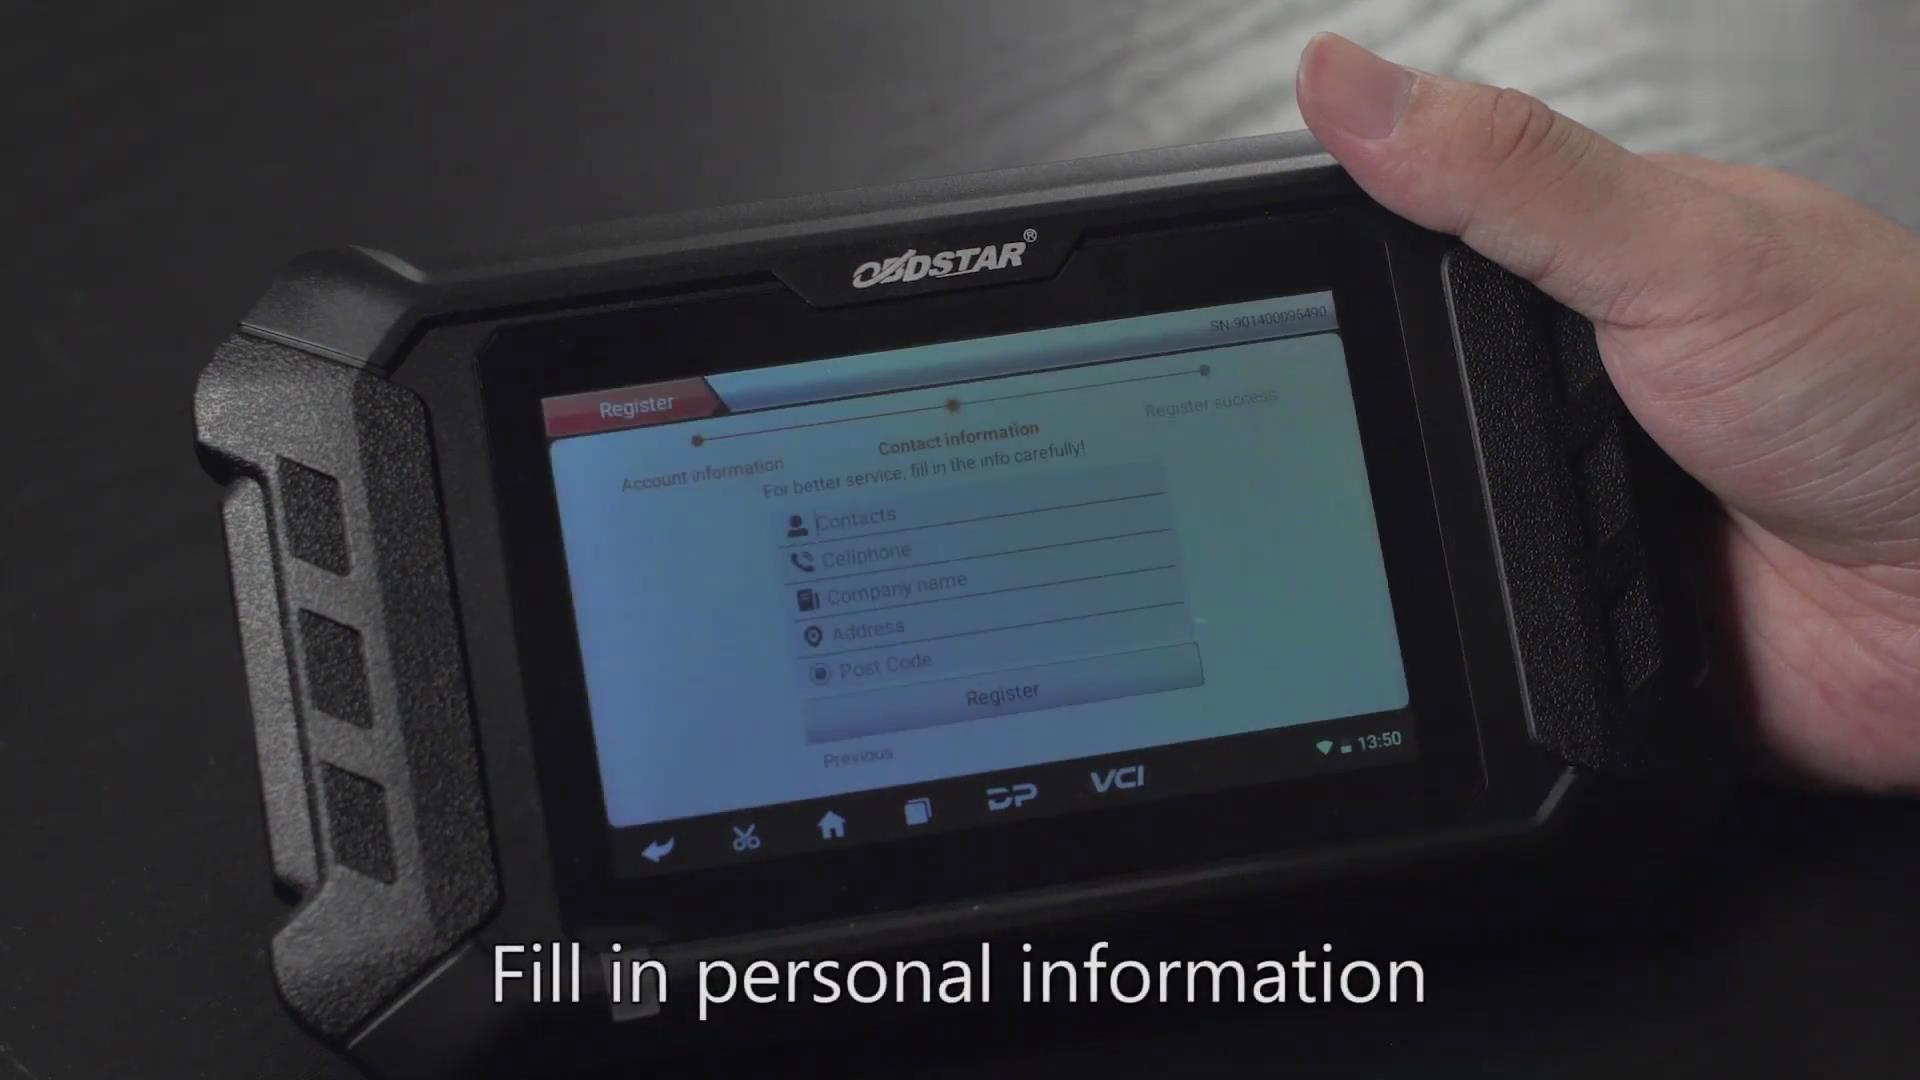 How-to-Register-&-Upgrade-Obdstar-X300-MINI-Scan-Tool-4